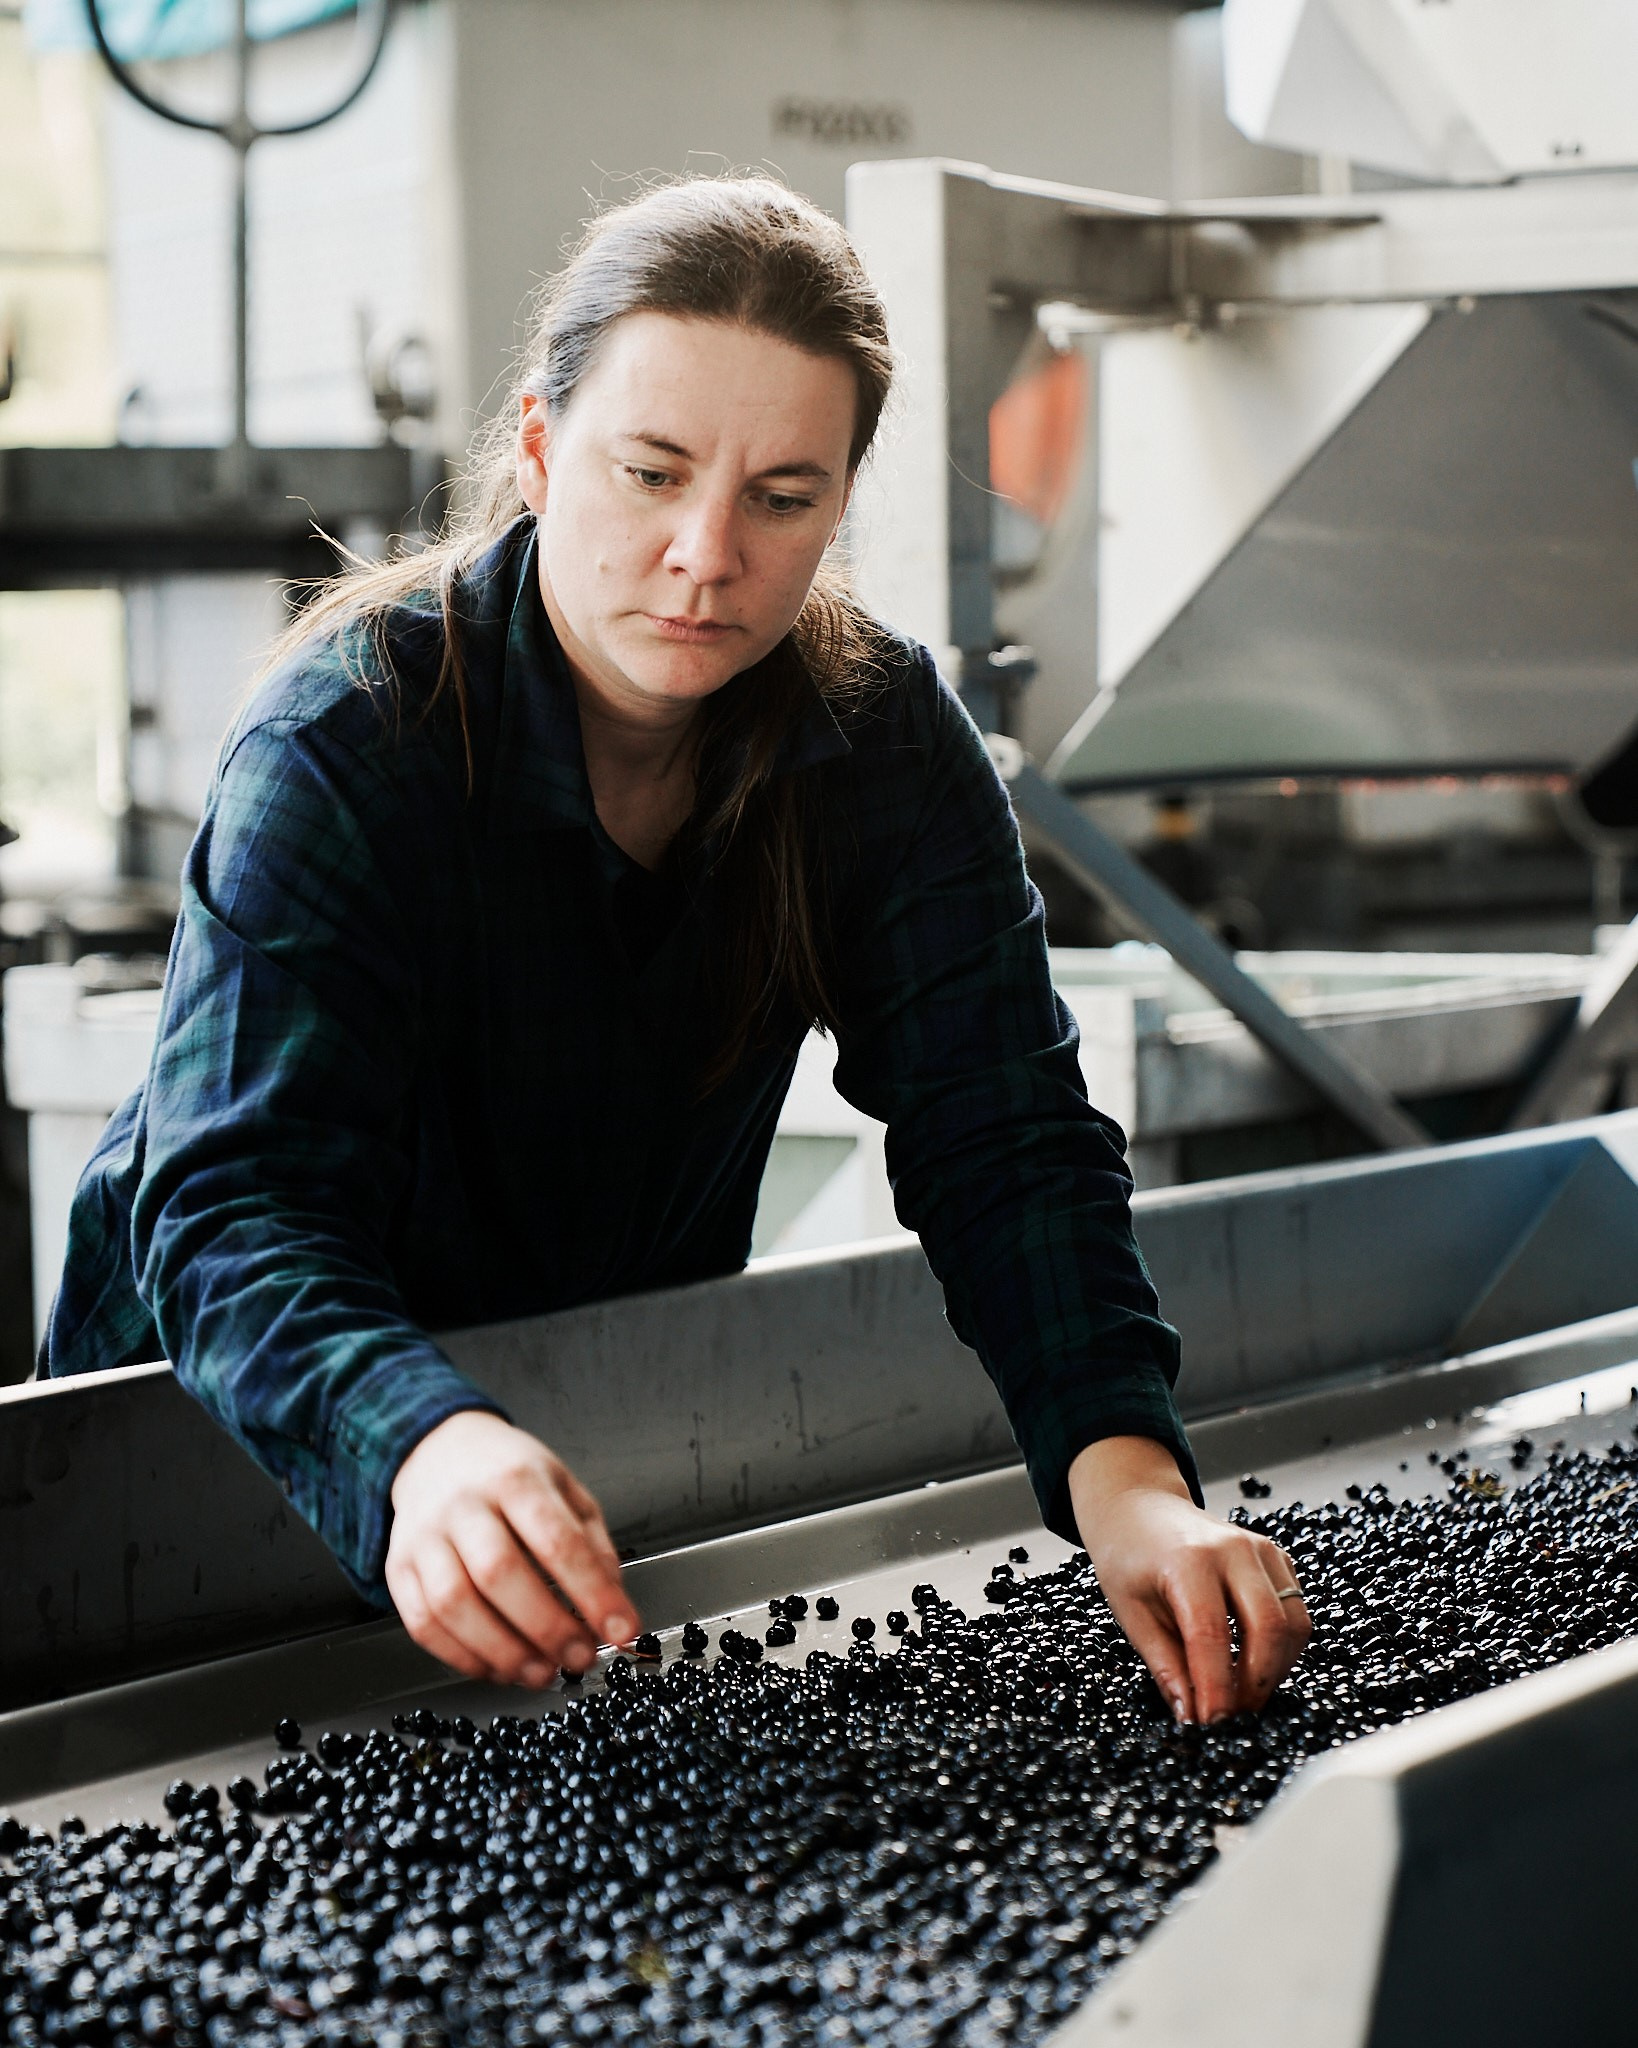 Ms Chester is the Head of Winemaking and Vineyards at Giant Steps in the Yarra Valley